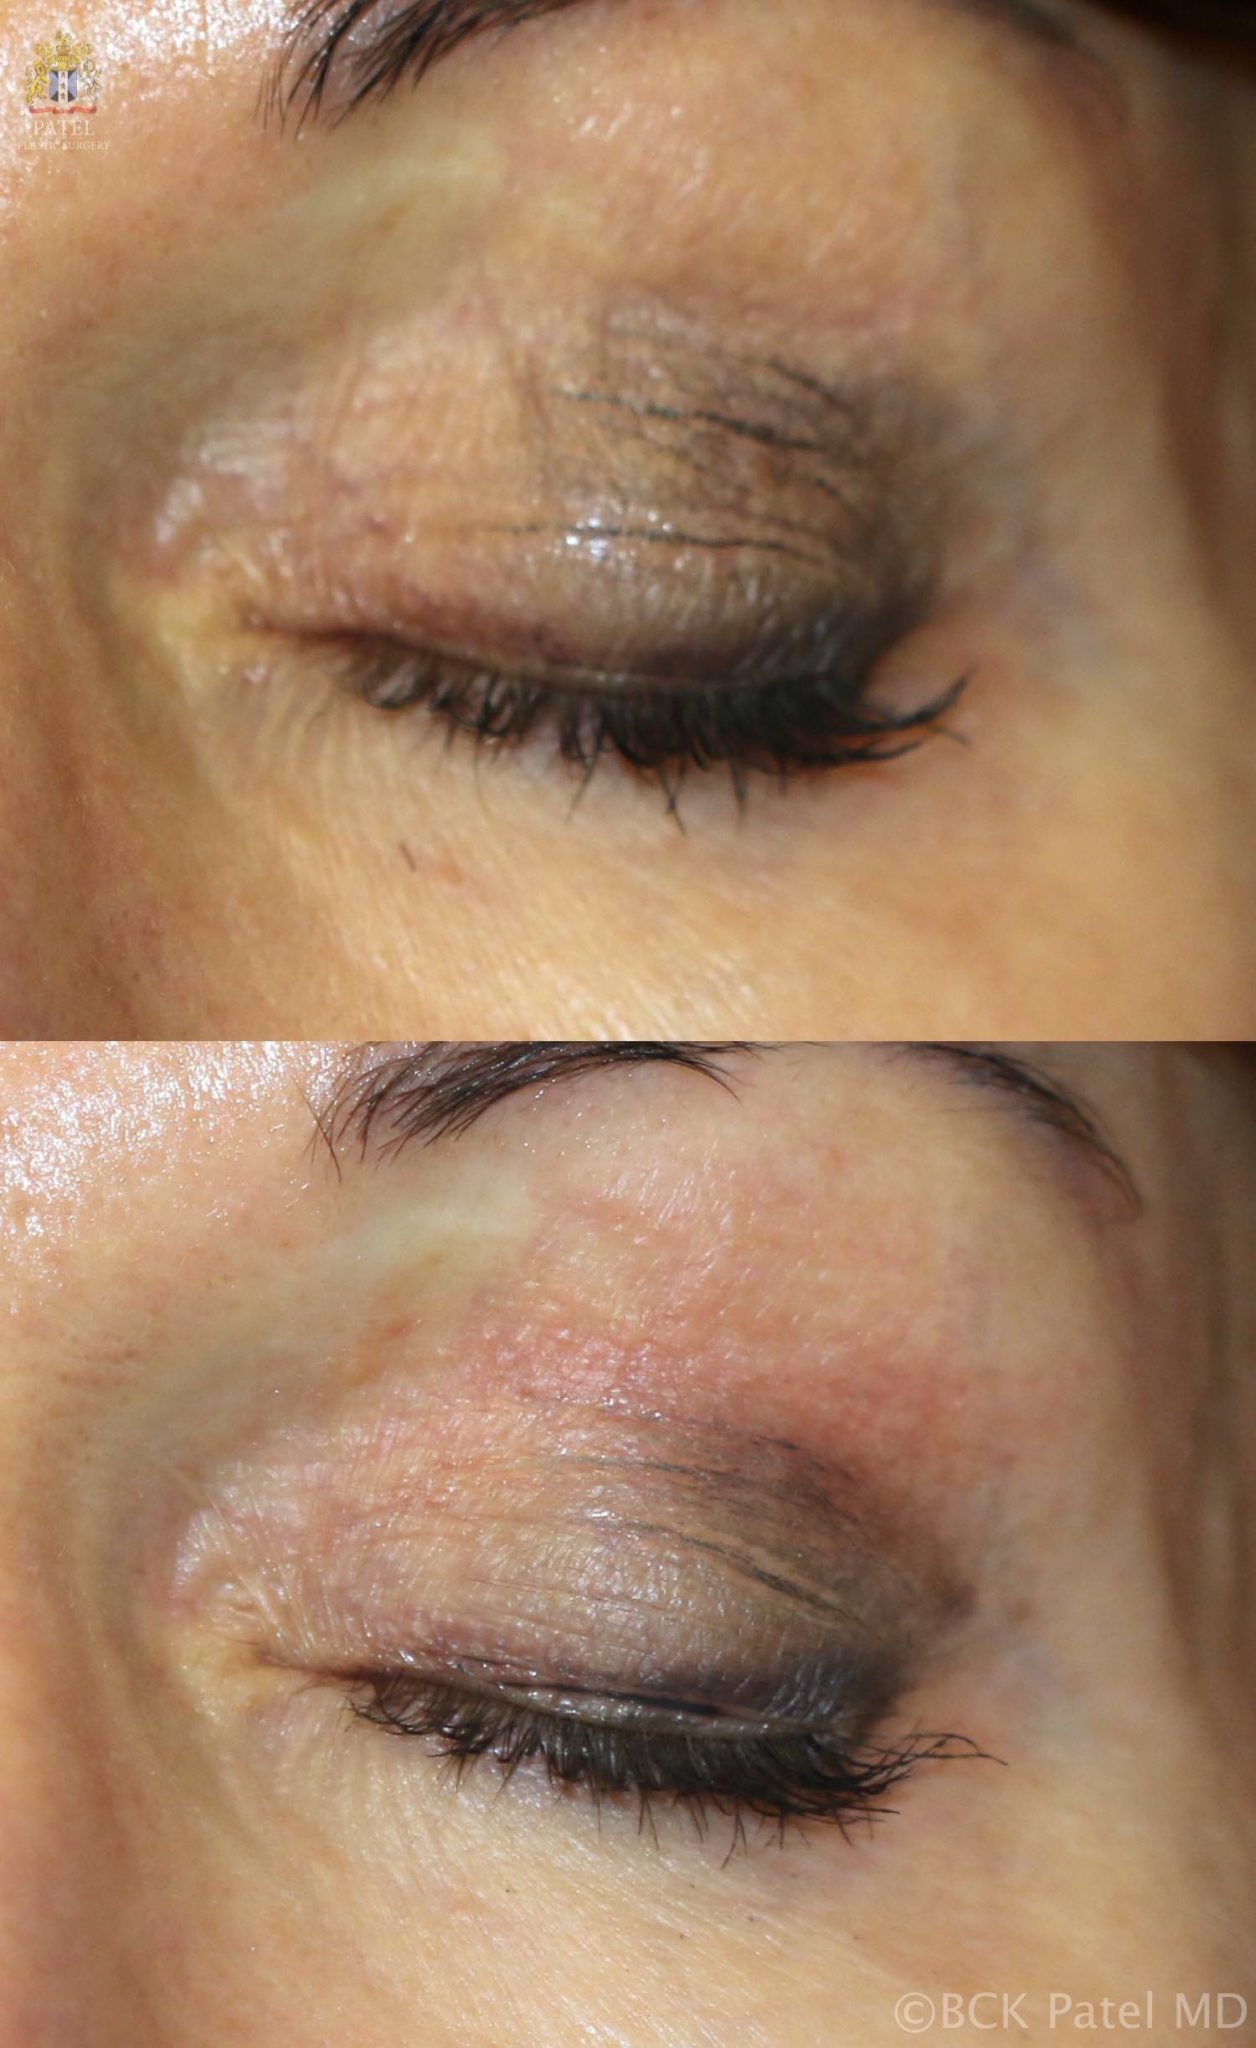 englishsurgeon.com. Photos show a nice improvement in the wrinkles and texture with CO2 laser treatment. BCK Patel MD, FRCS, Salt Lake City, St. George